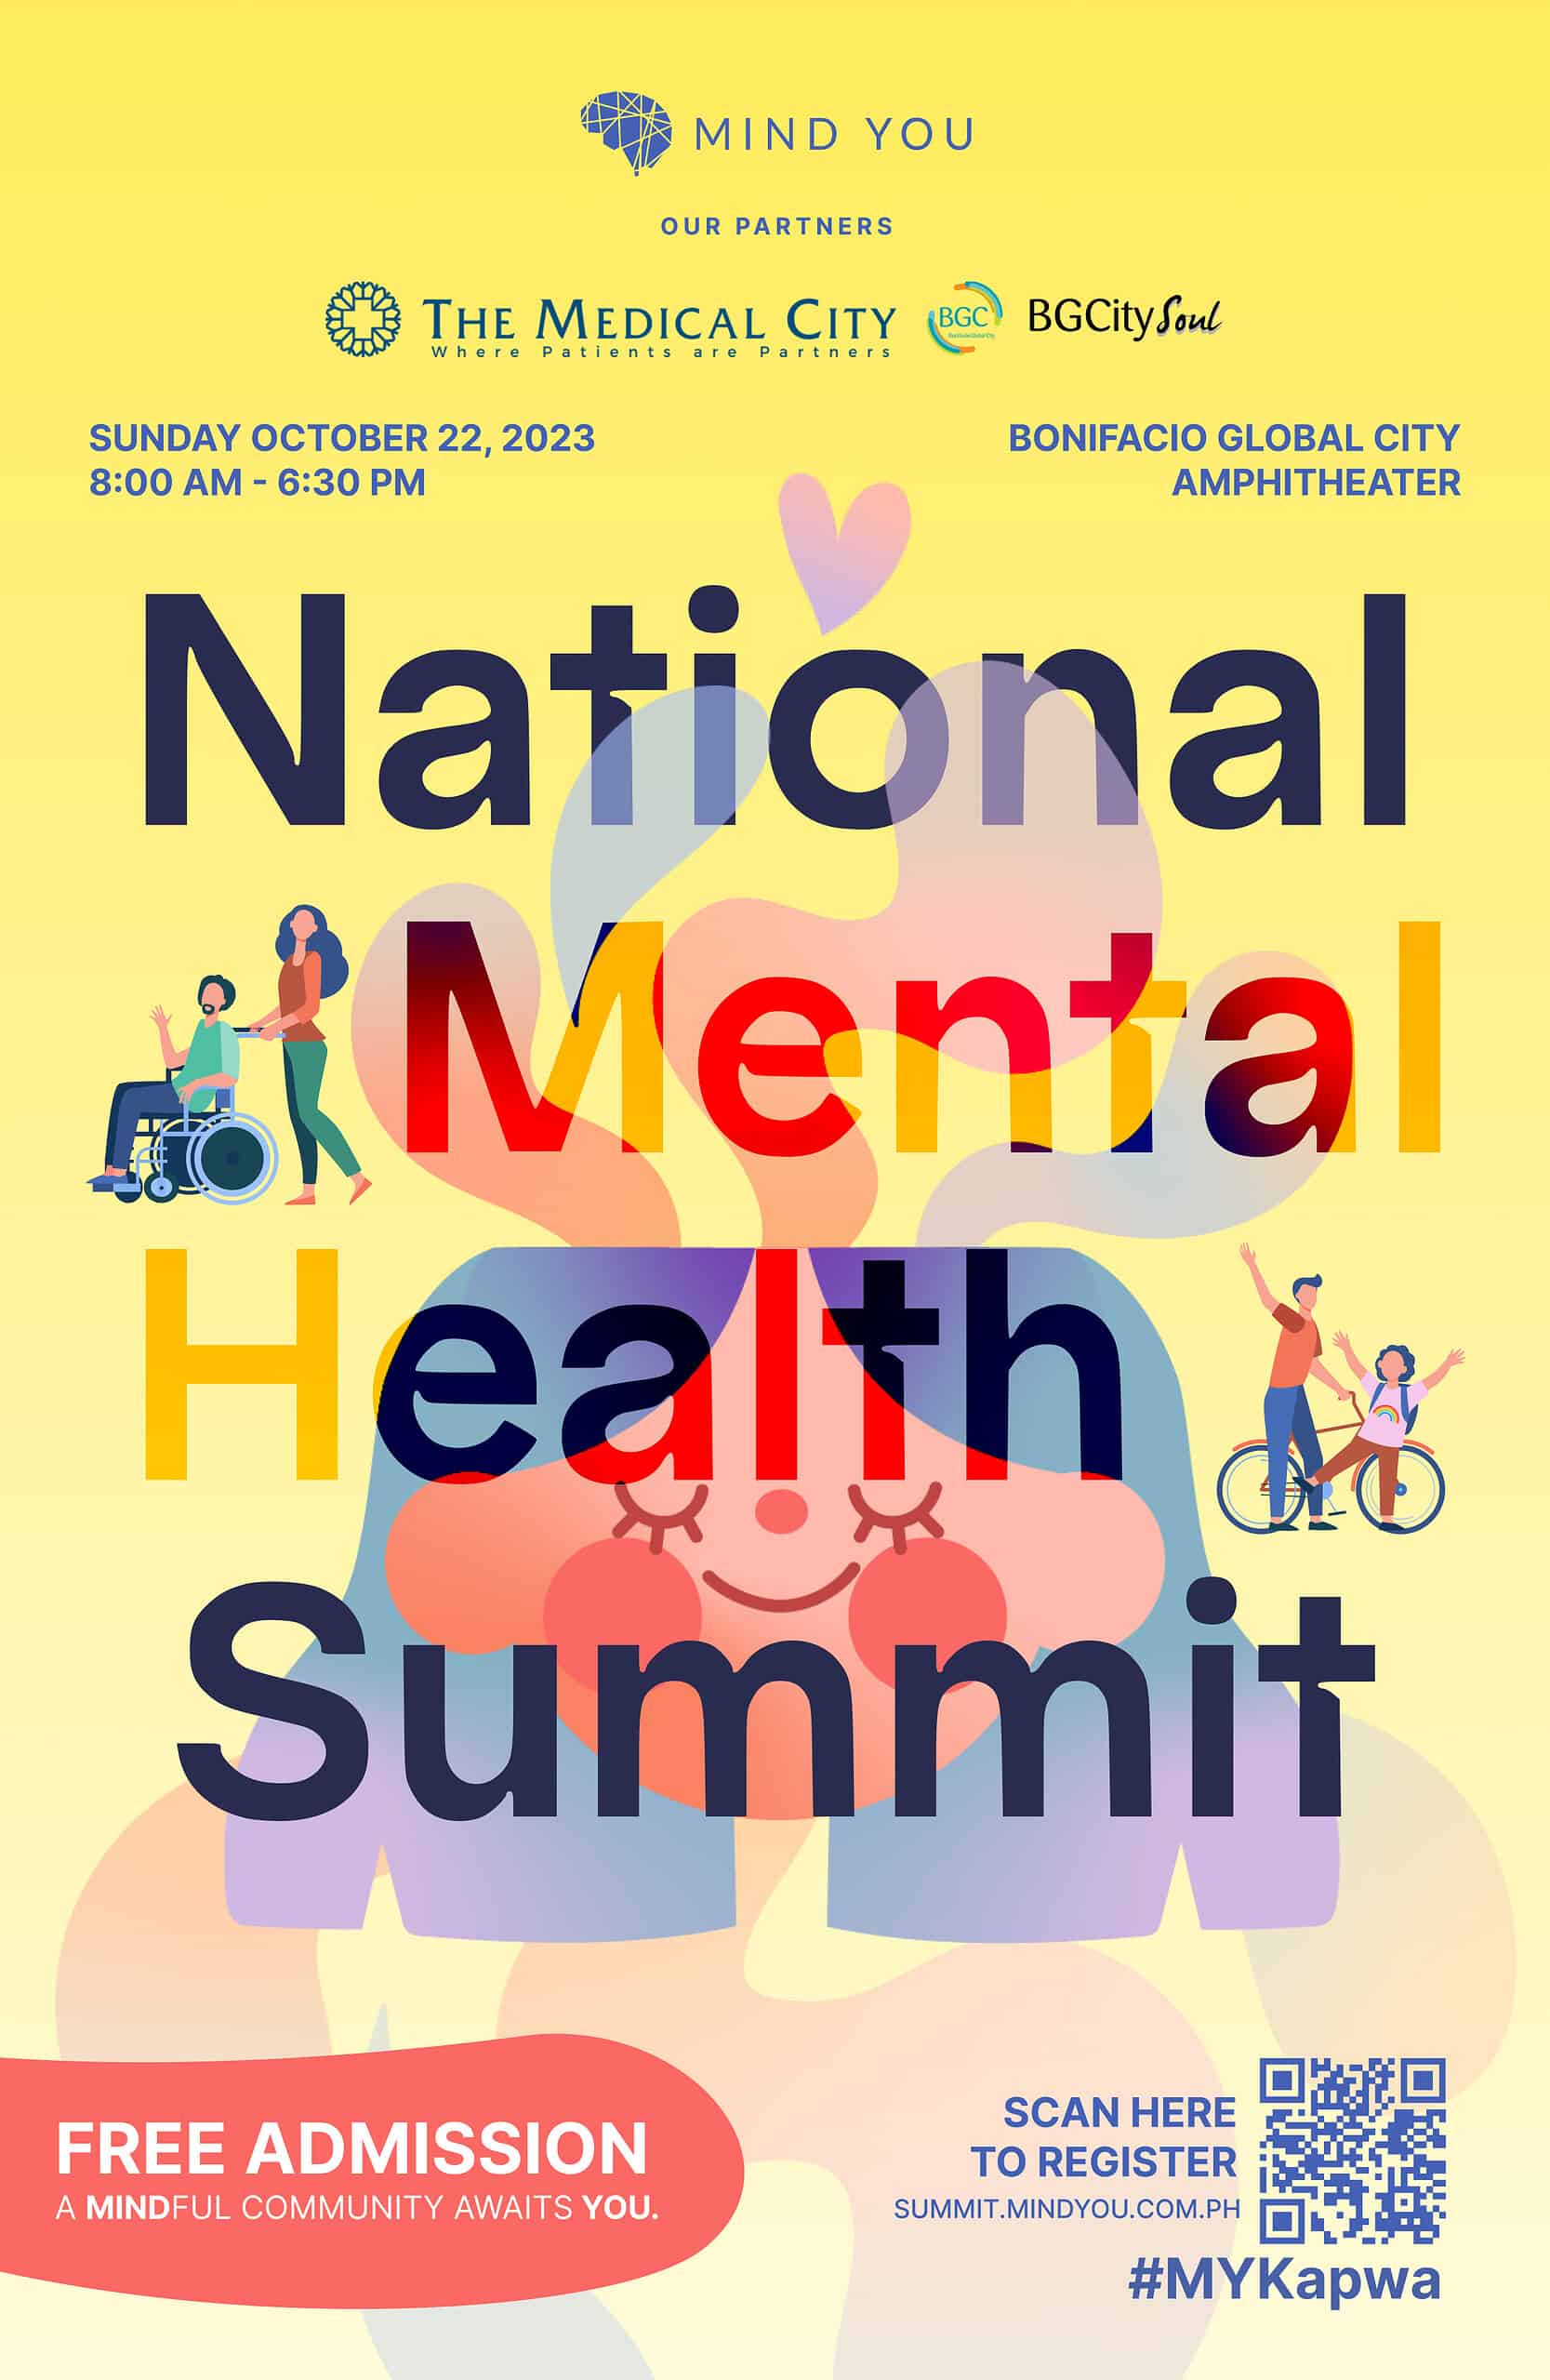 The poster for the national mental health summit.